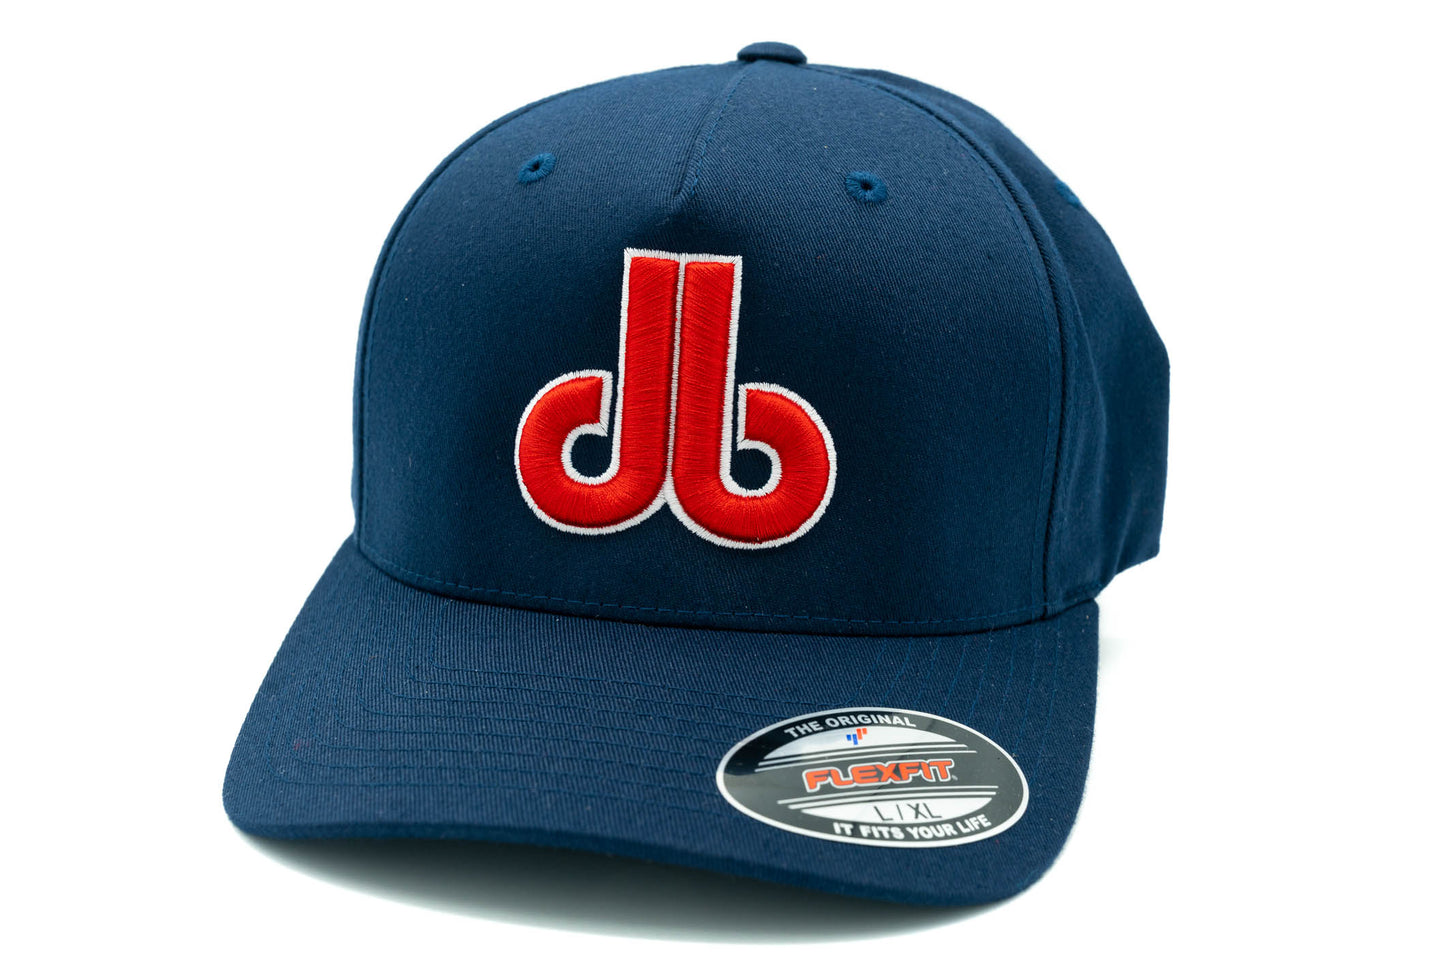 Navy and Red db hat